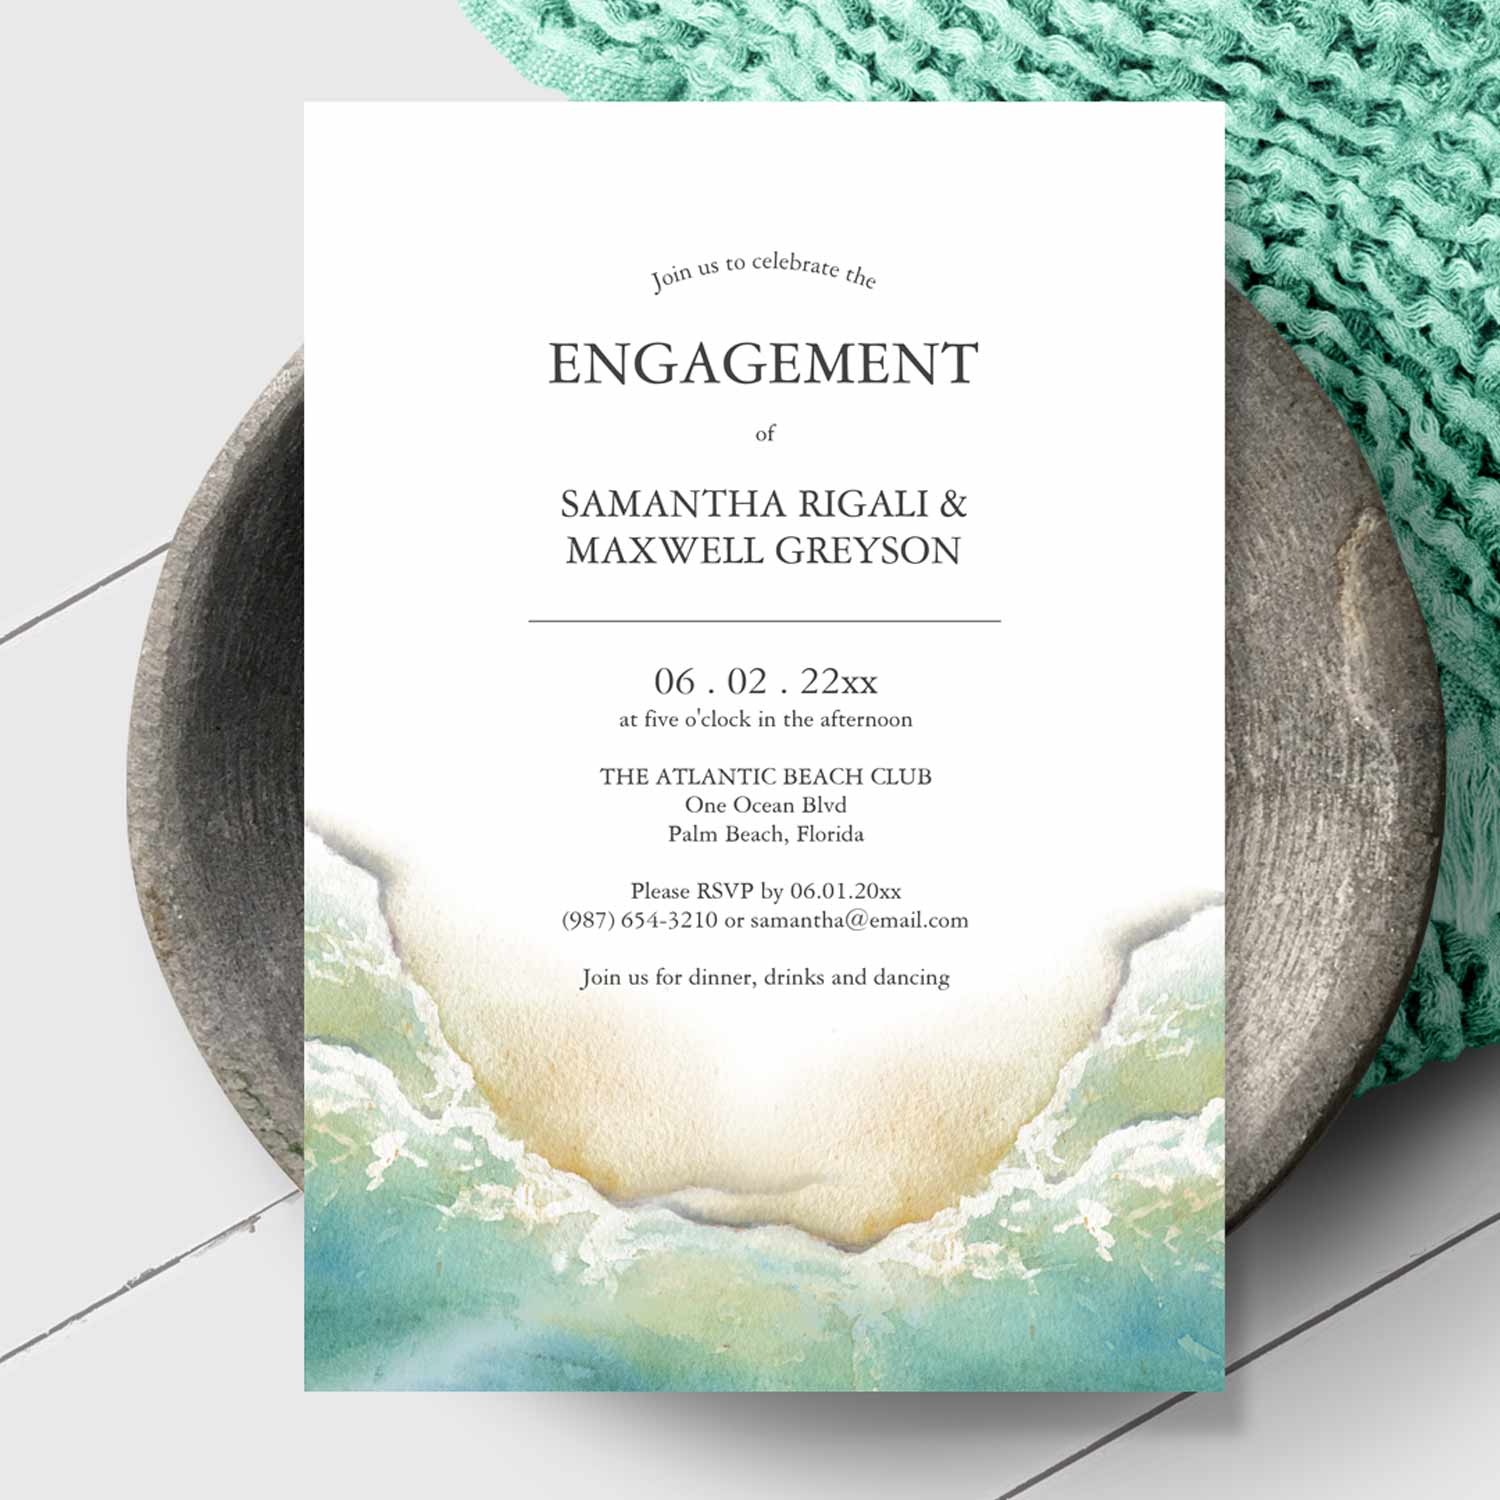 Engagement invitations watercolor beach shoreline art by Victoria Grigaliunas of Do Tell A Belle. Click to shop this invite